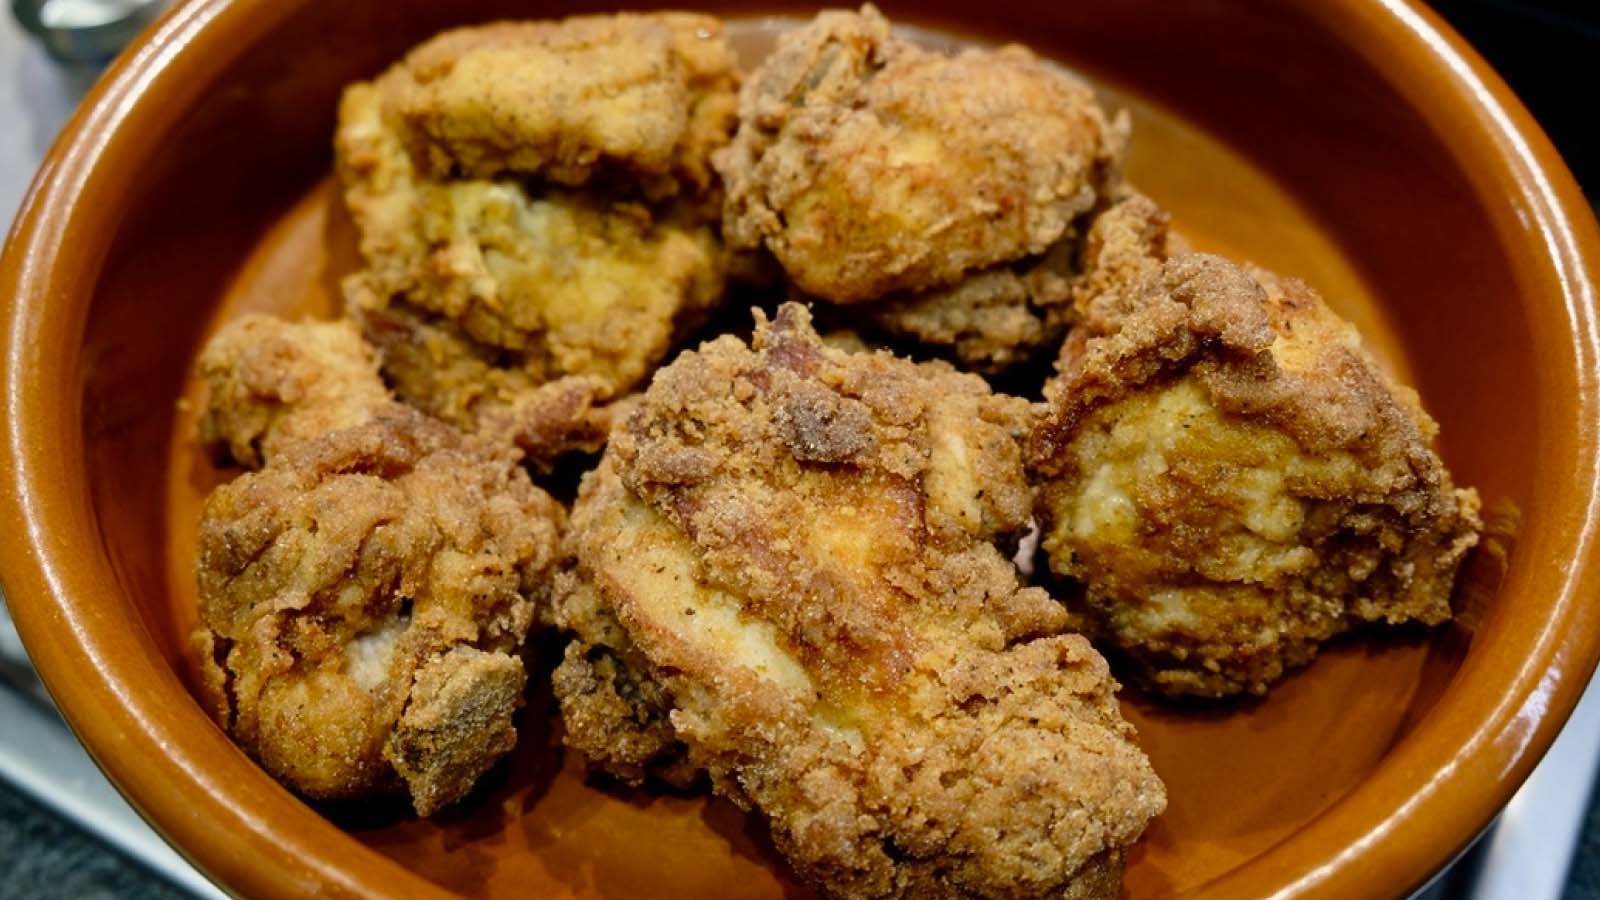 Gourmend recipe for low fodmap fried chicken